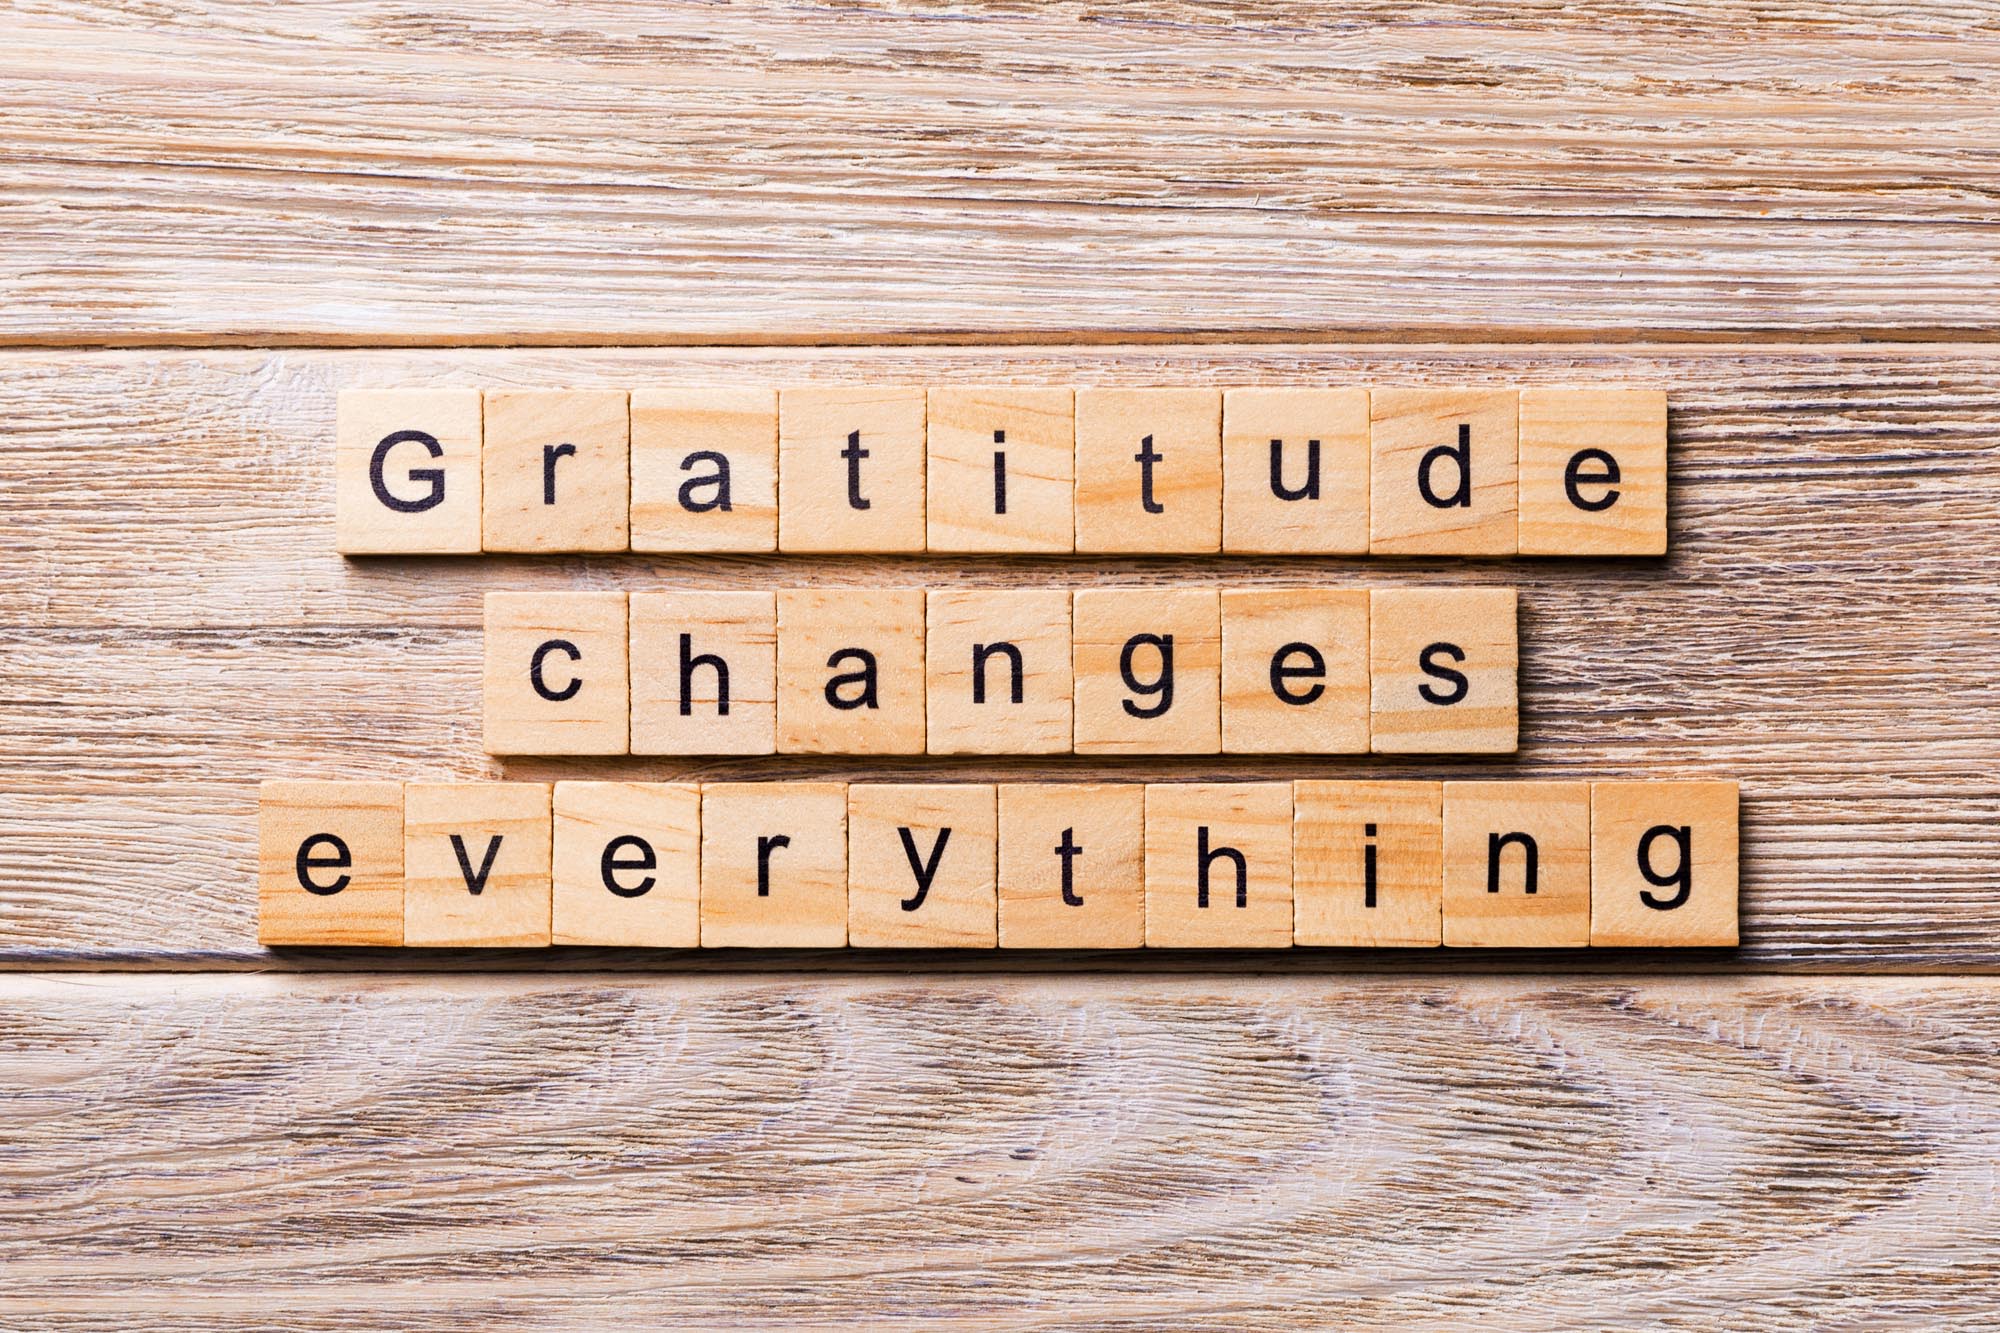 What Are Great Leaders Grateful For?